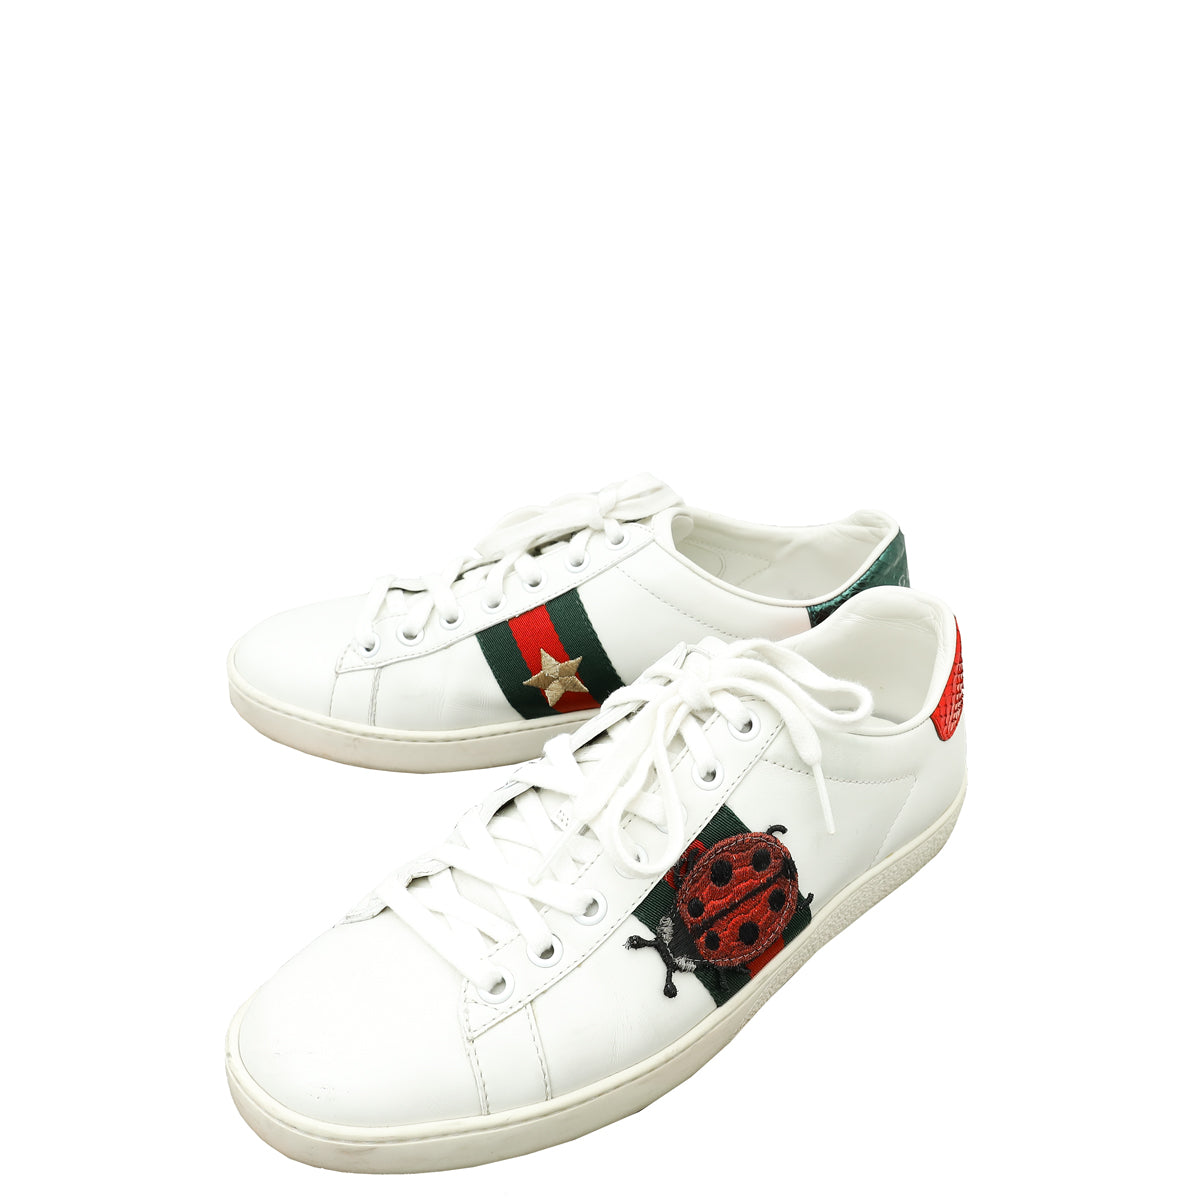 Gucci White Ace Pineapple x Ladybug Embroidered Sneakers 37